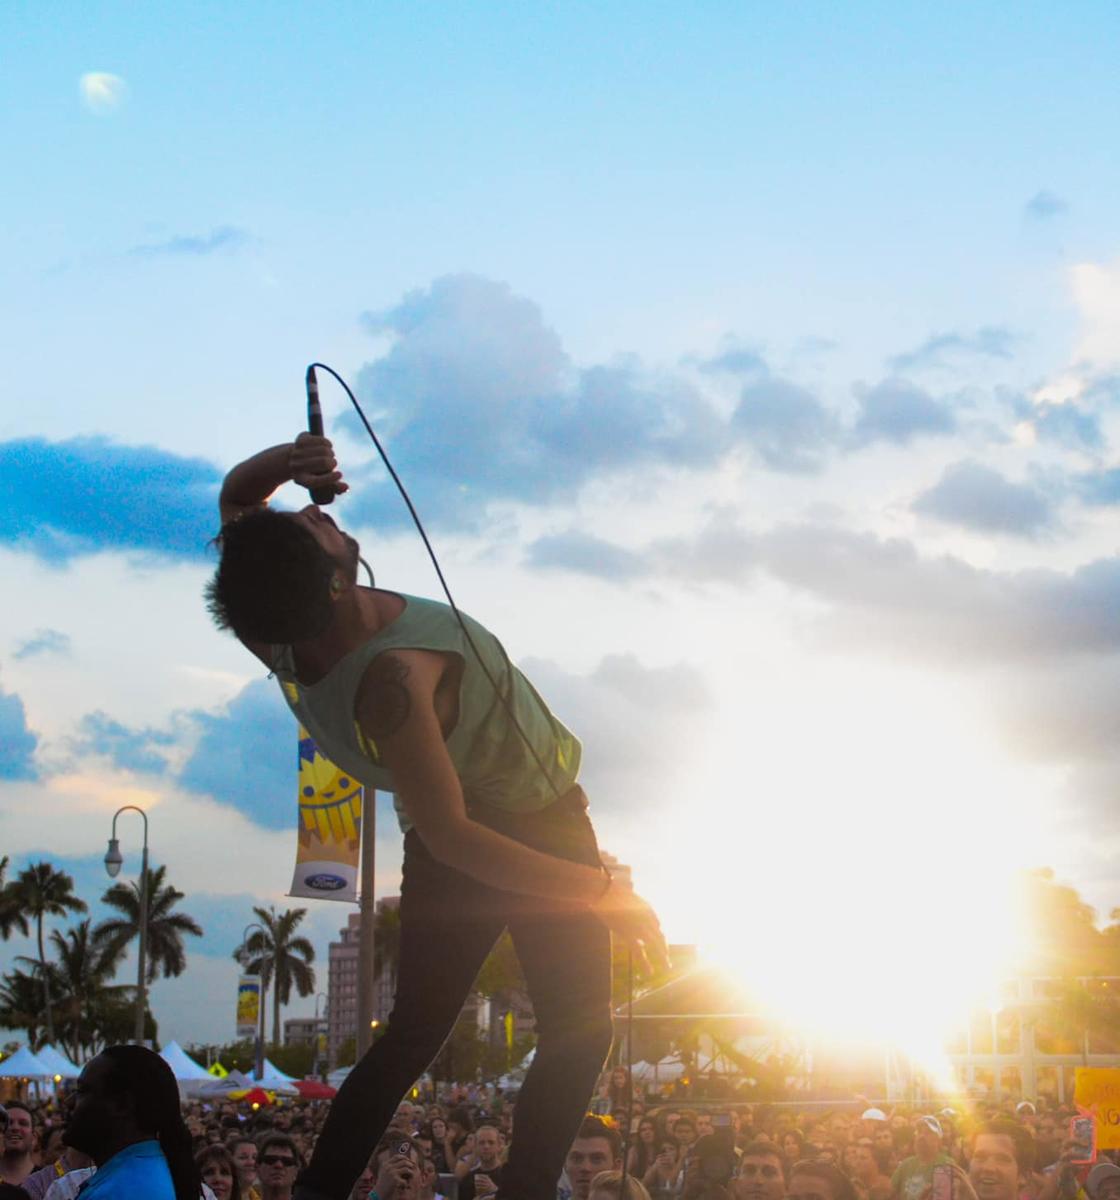 Today is the LAST day of @SunFestFL! ☀️🎵 Don't miss out on the final day of incredible music, art, food, and fun in #DowntownWPB! Learn more and see today's lineup at DowntownWPB.com/SunFest. #LOVEThePalmBeaches #ThePalmBeaches